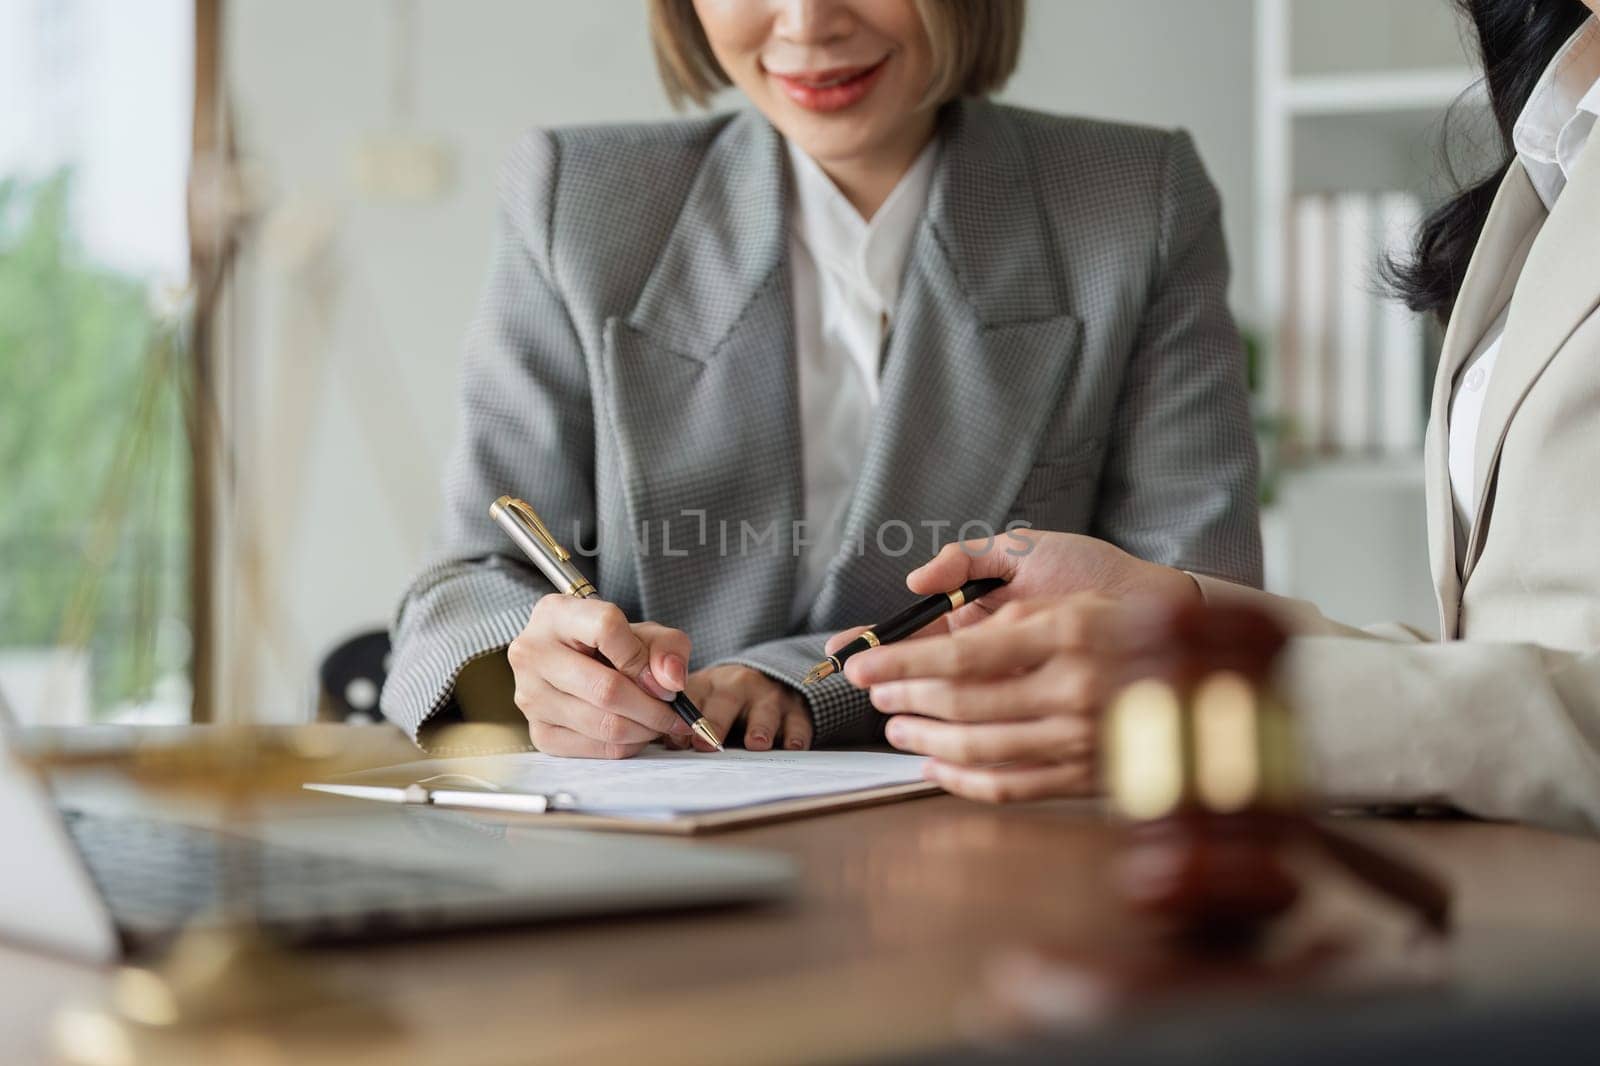 A woman is signing a document at a desk with a laptop and a chair. The woman is wearing a suit and is writing with a pen. The scene suggests a professional setting